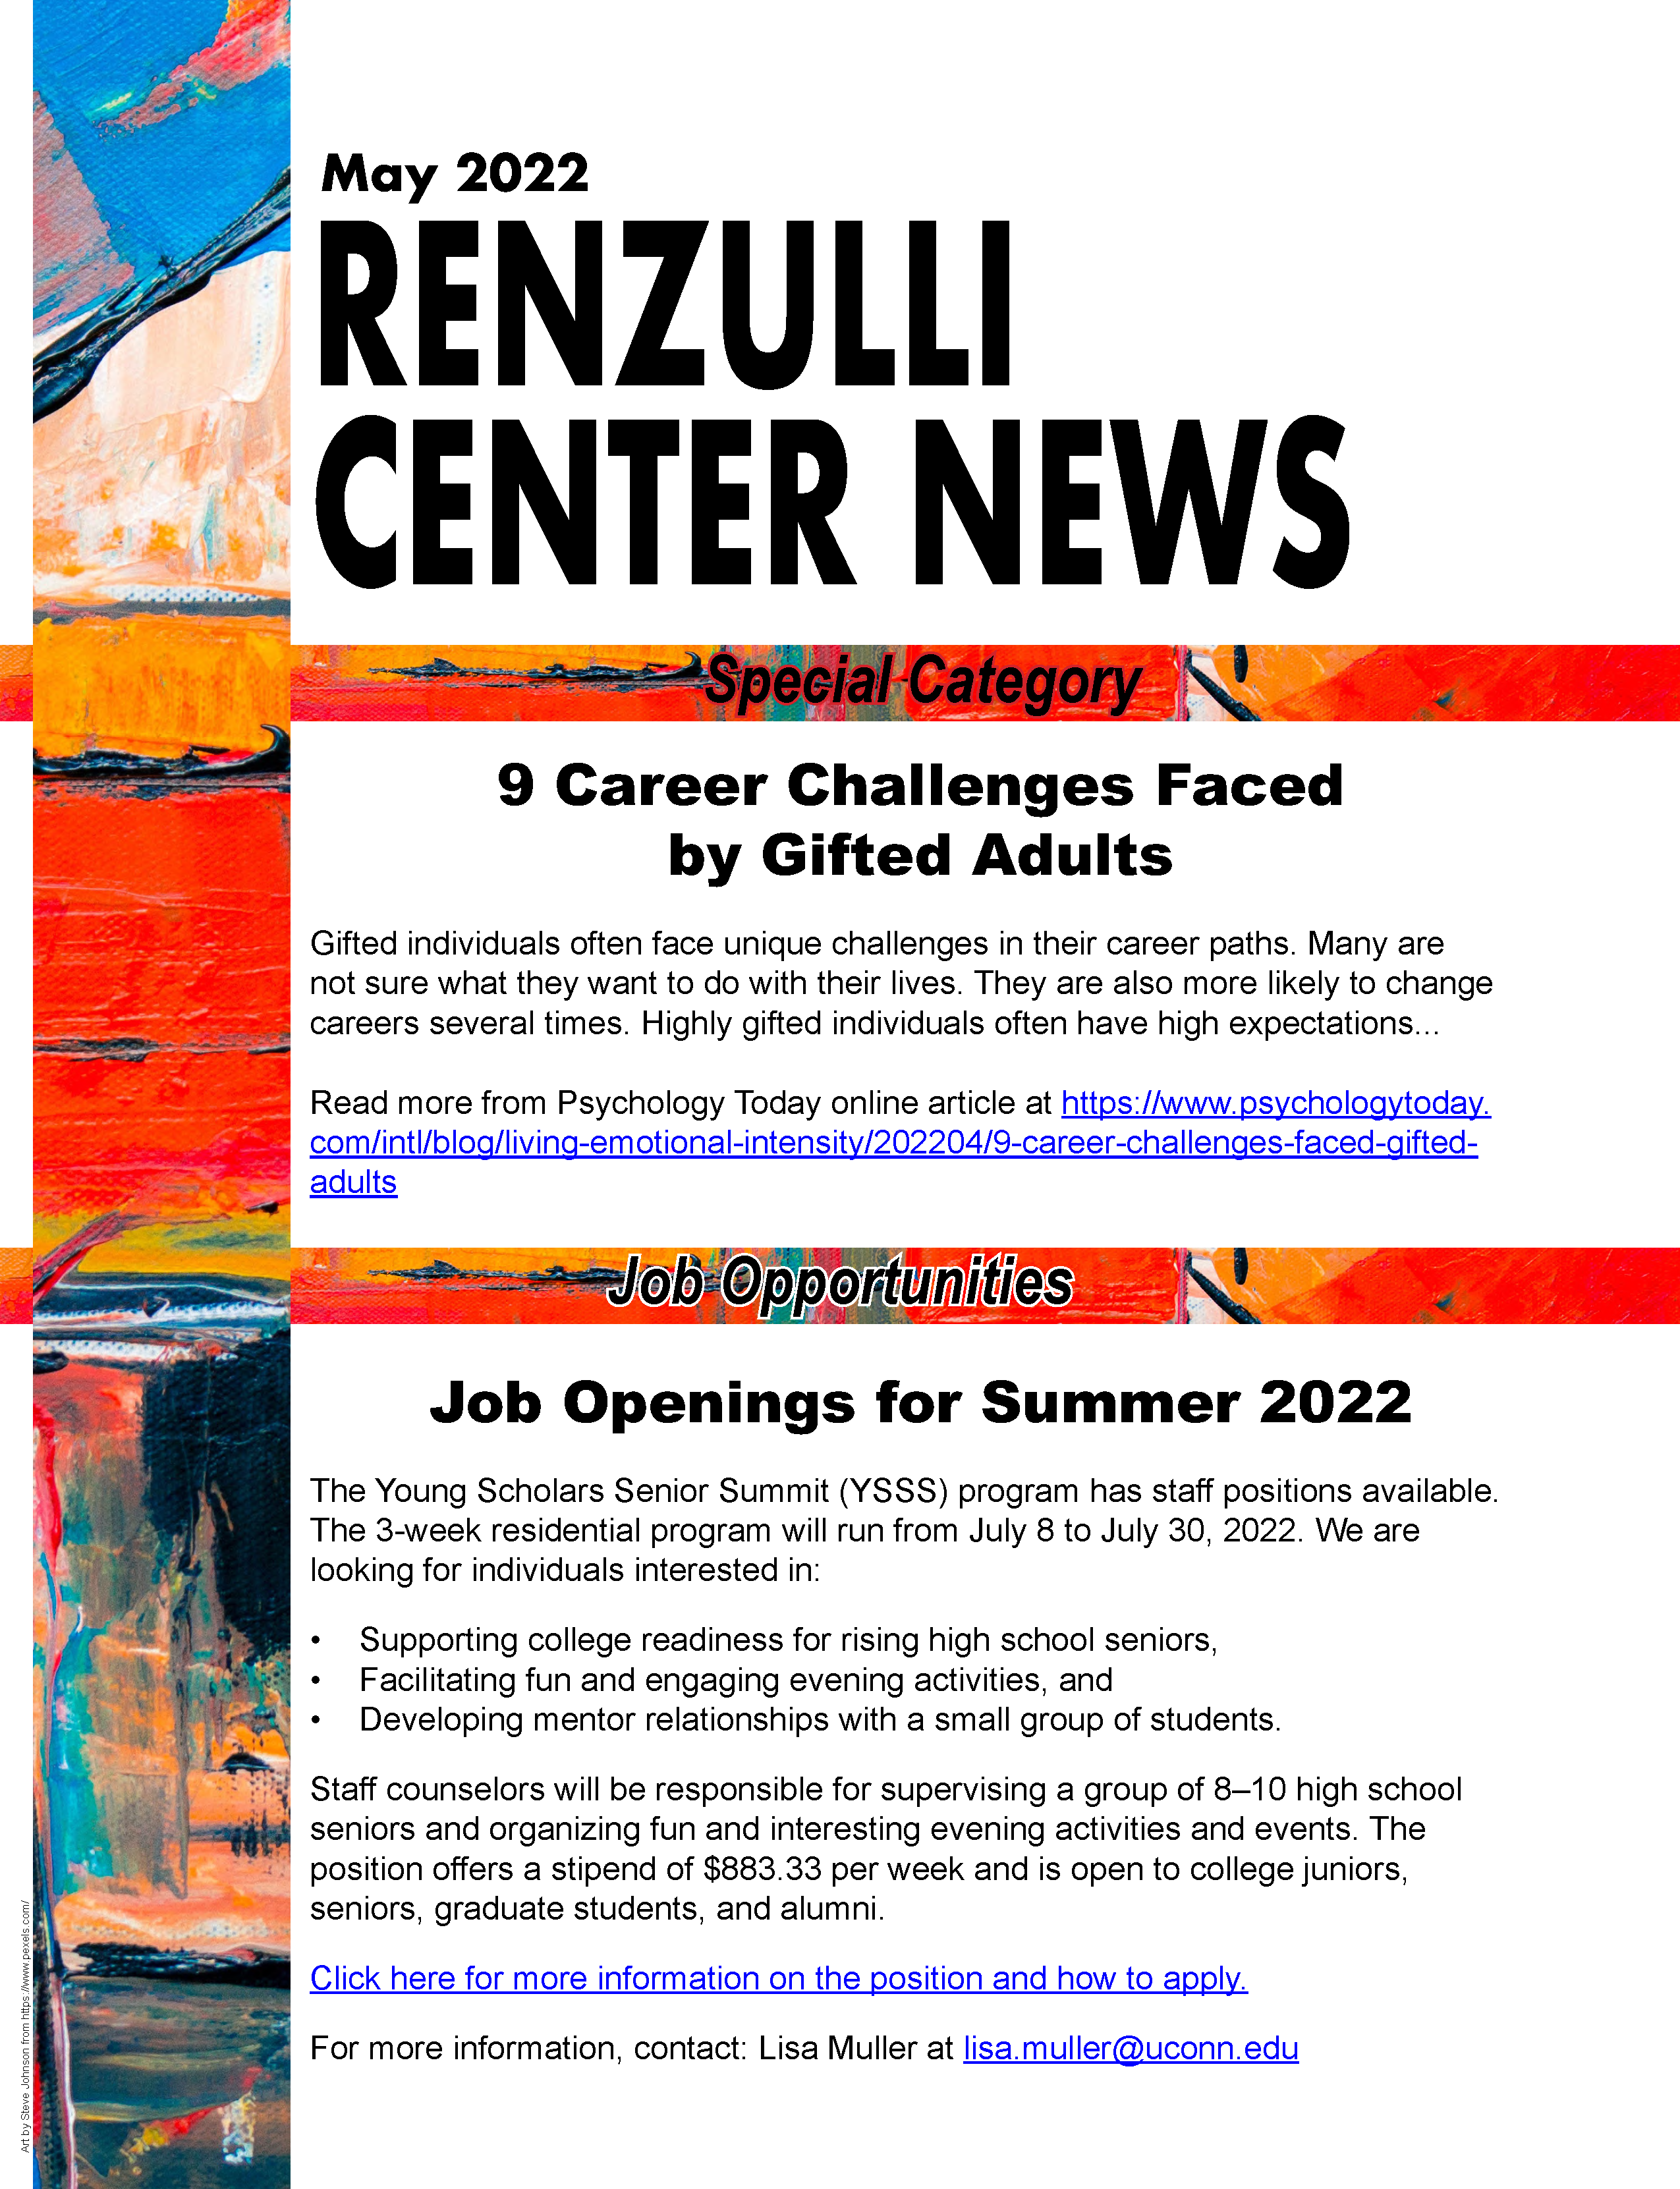 May 2022 Renzulli News Cover Graphic